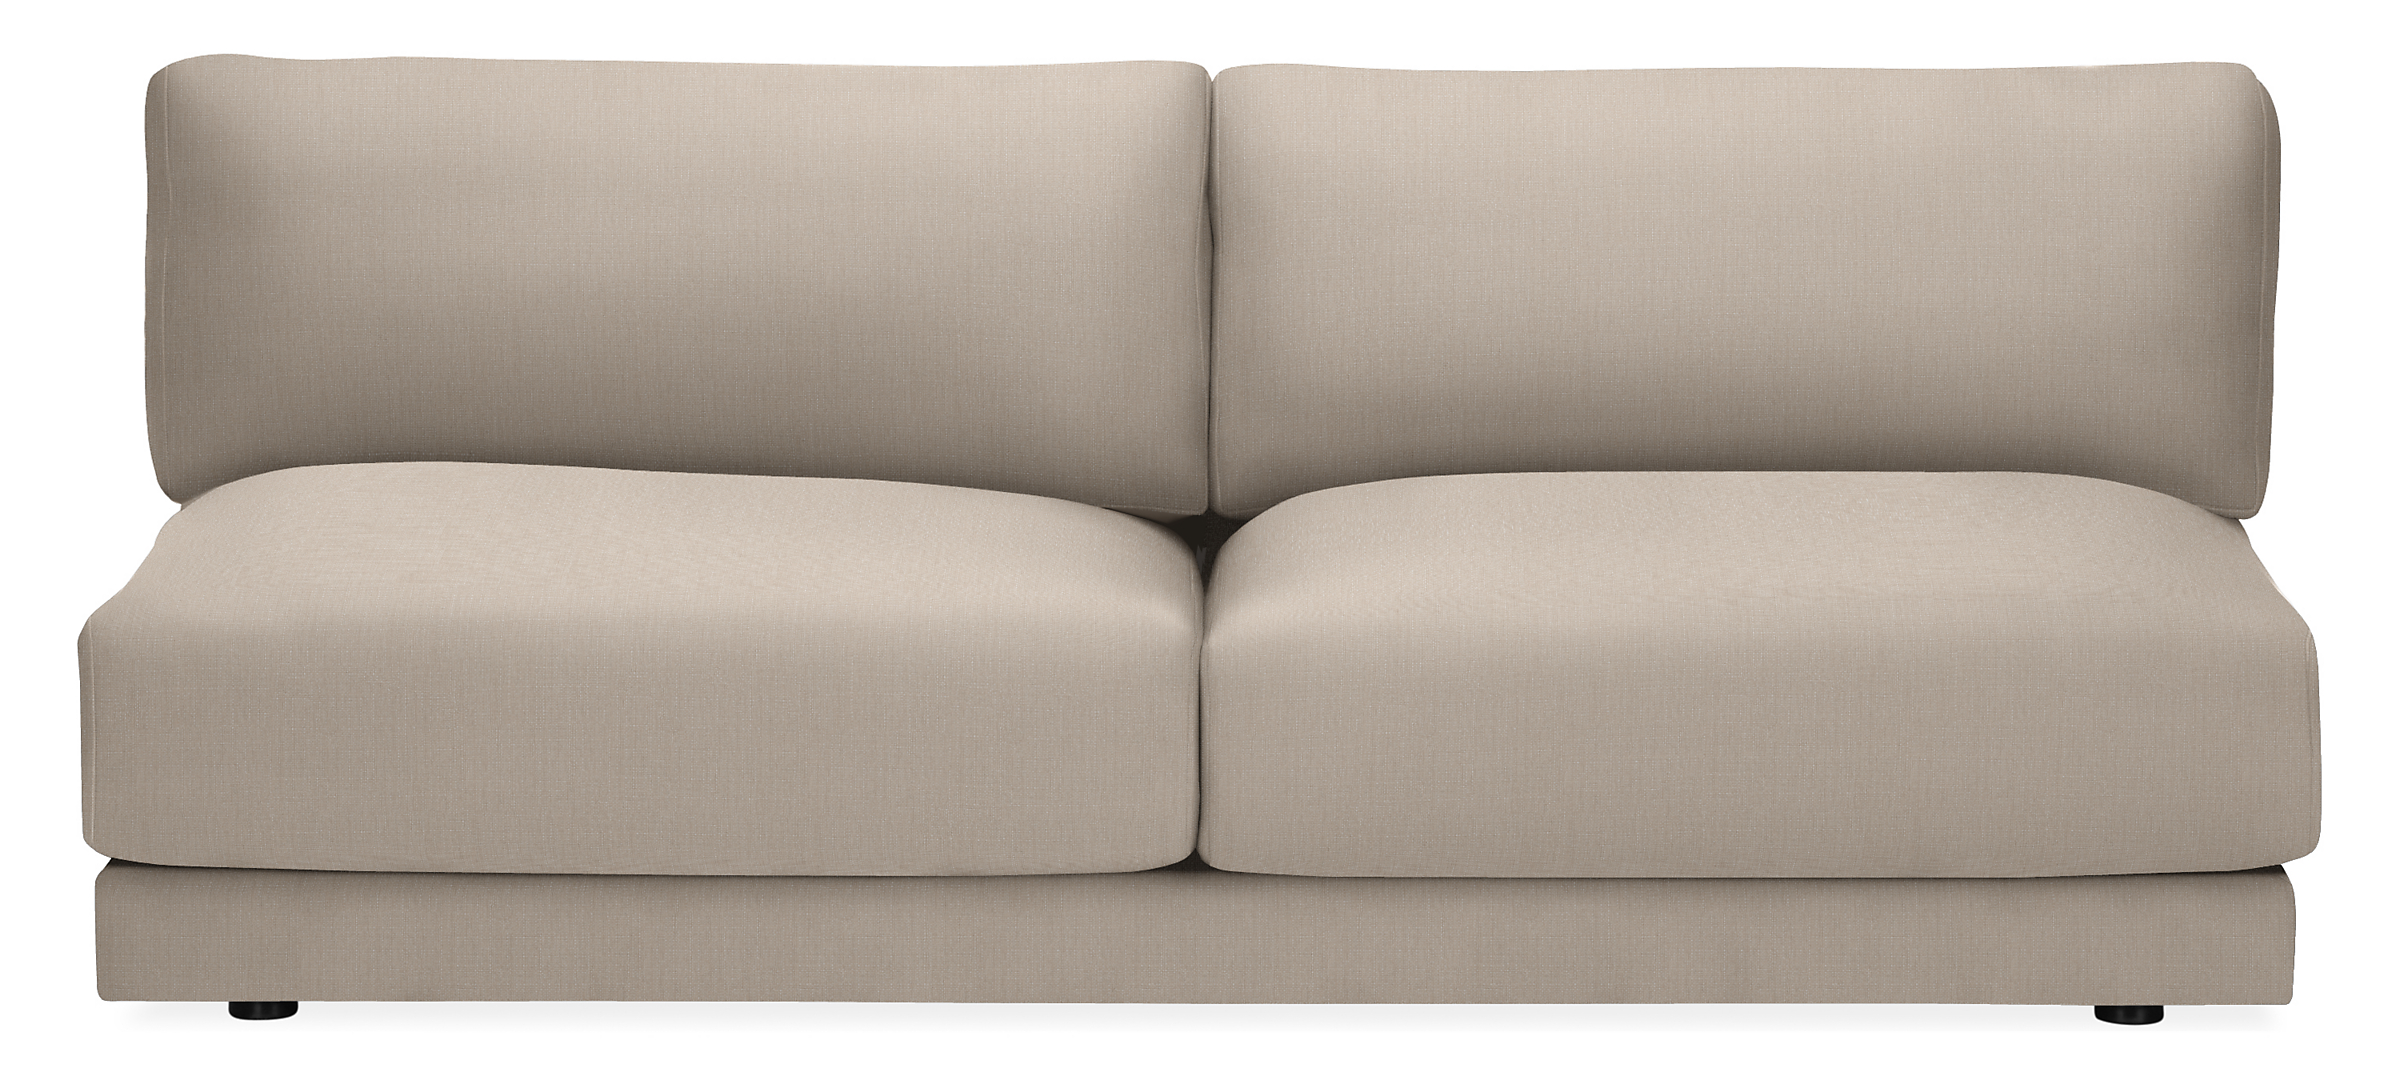 Clemens 66" Armless Loveseat in Hines Oatmeal